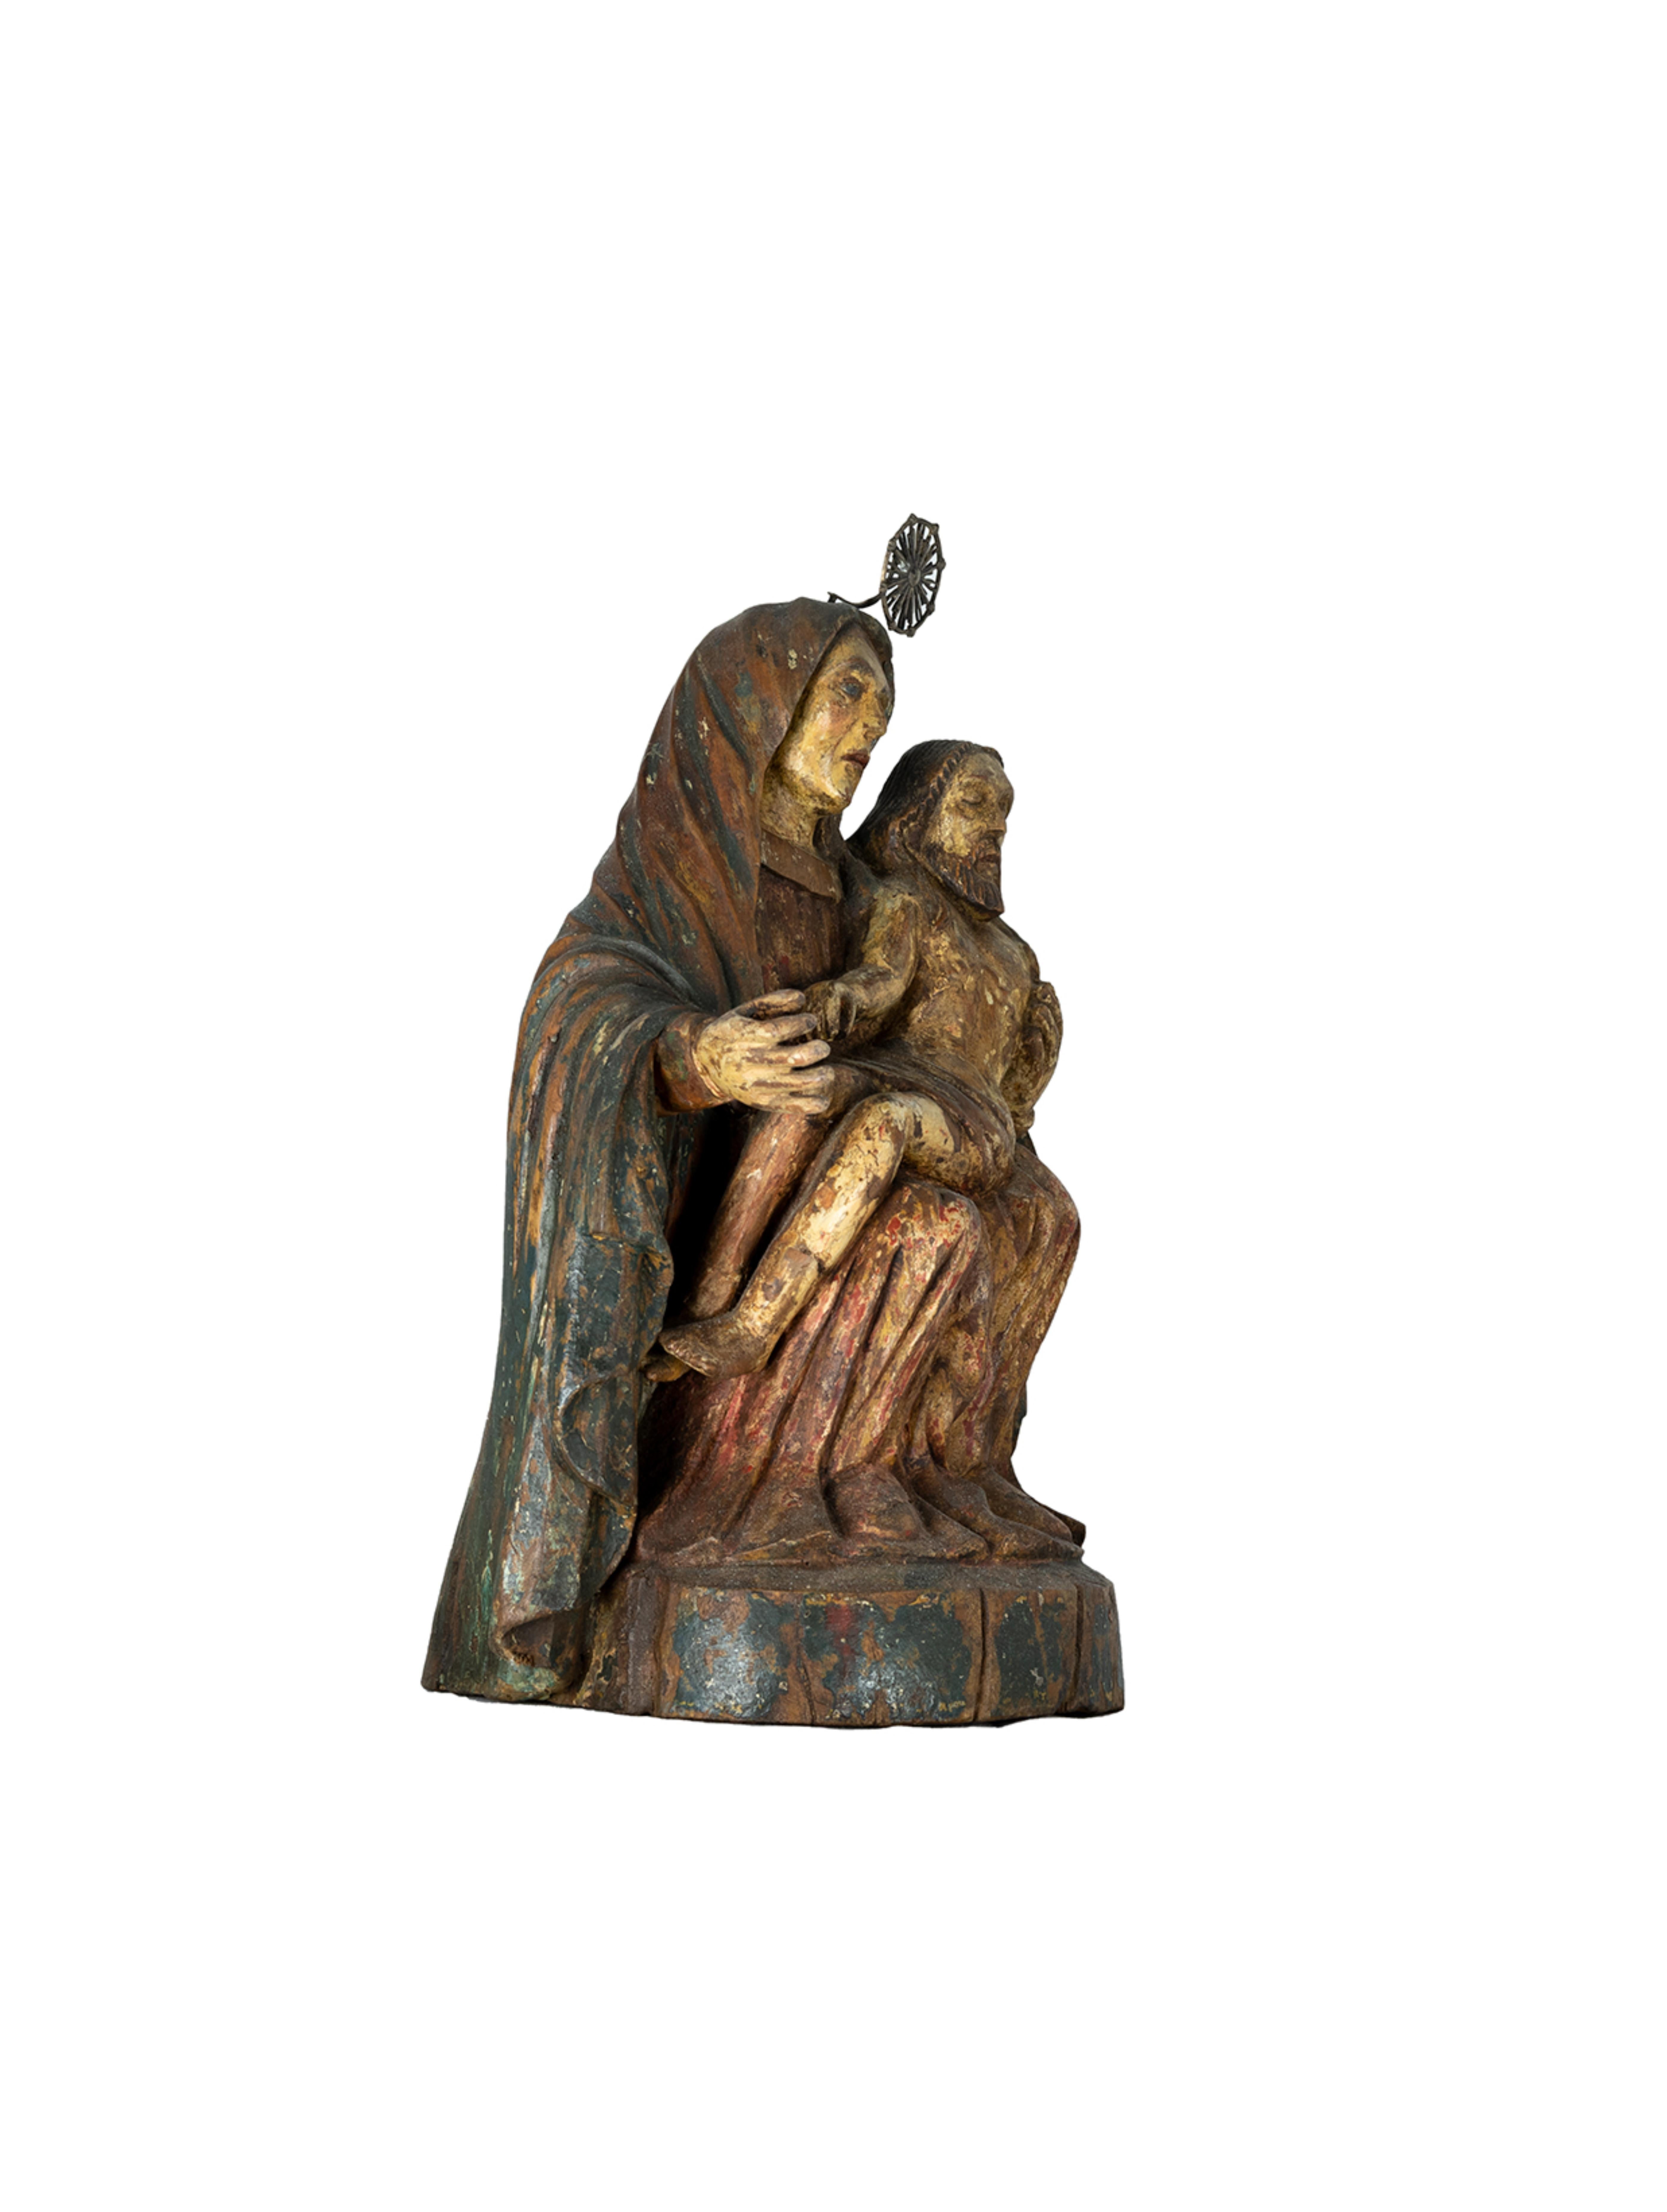 A 18th Century figure of the Pietà or the ''Virgin of Mercy'' , carved in polychrome chestnut wood. Our Lady appears seated on the throne with her head covered by a mantle supporting the inert body of Christ with her left arm. The face of the Holy